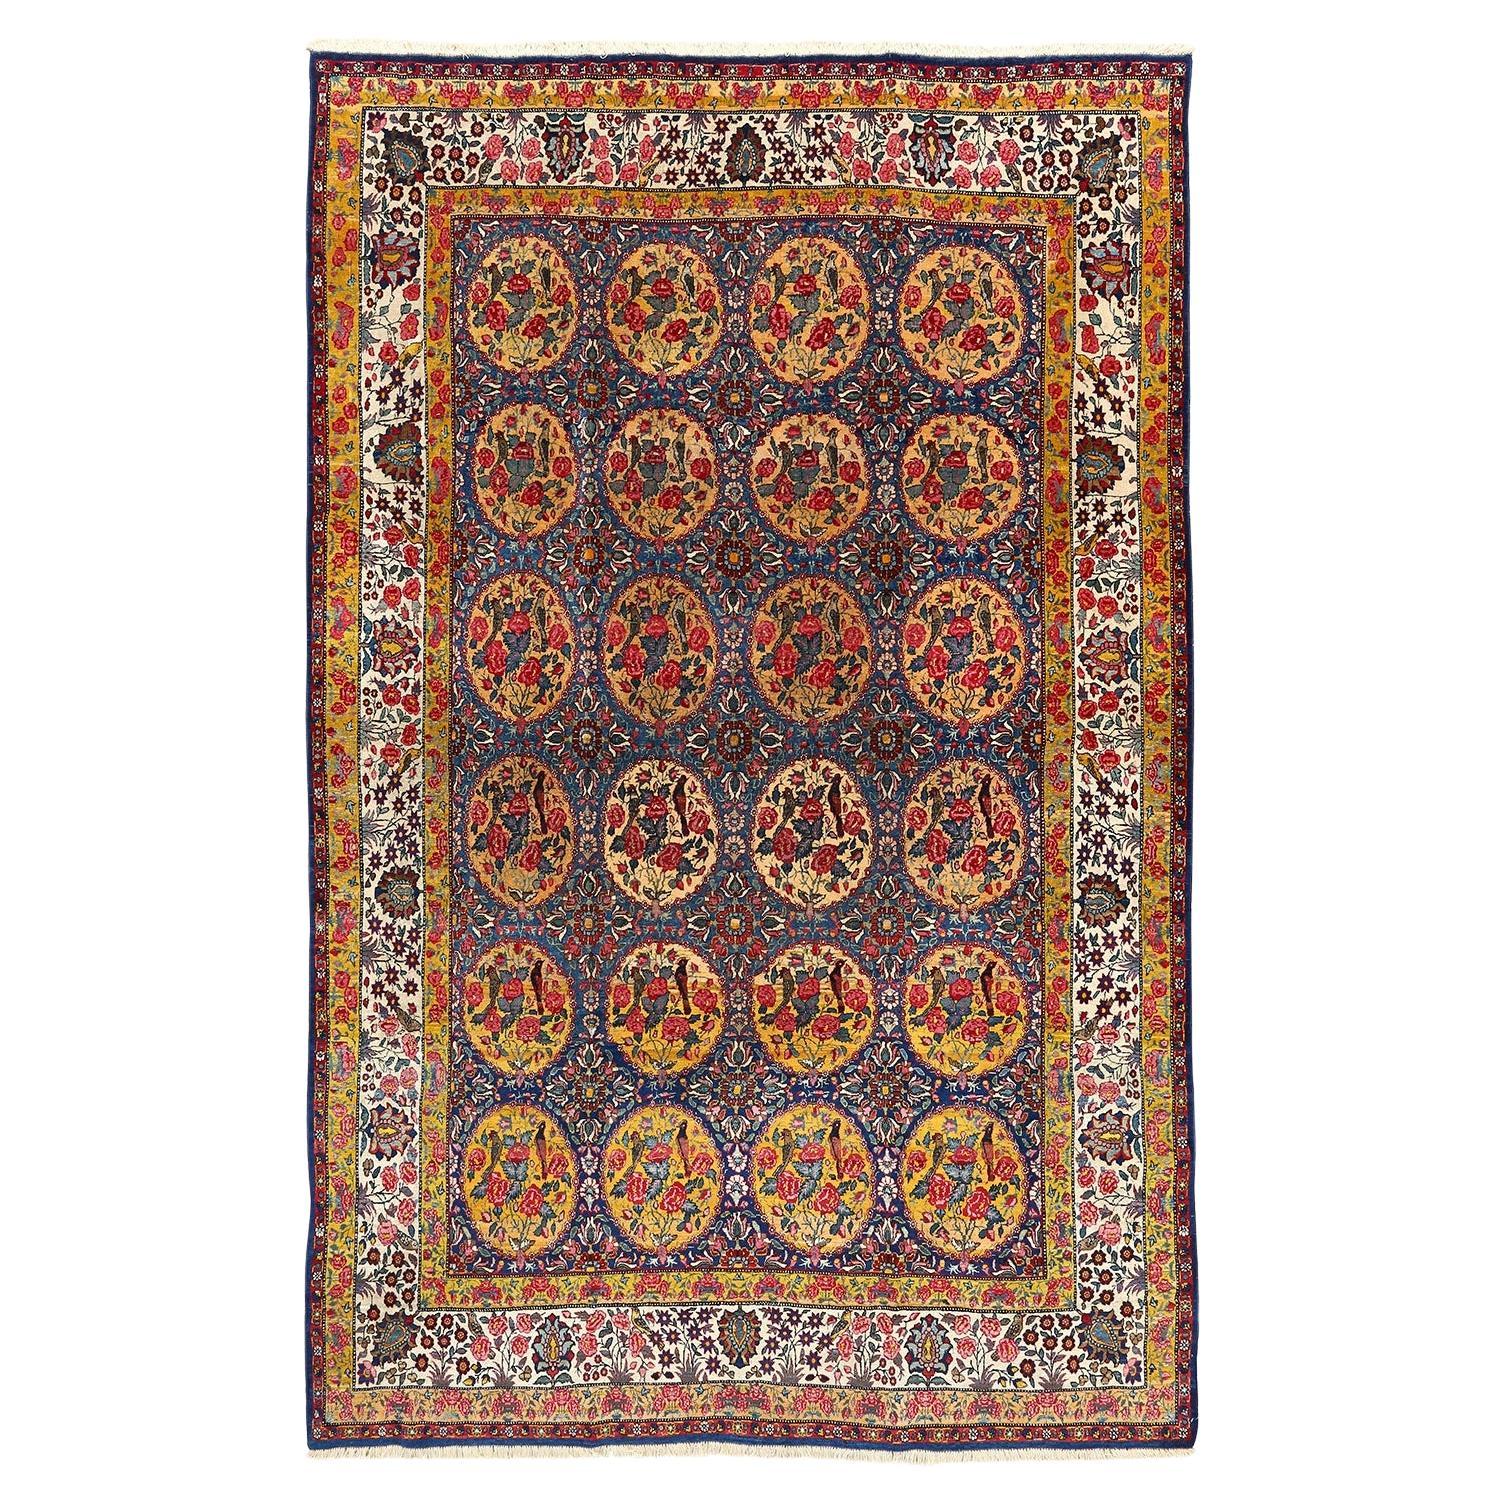 Damoka Collection Persian Antique Tehran - Size: 10 ft 0 in x 6 ft 8in